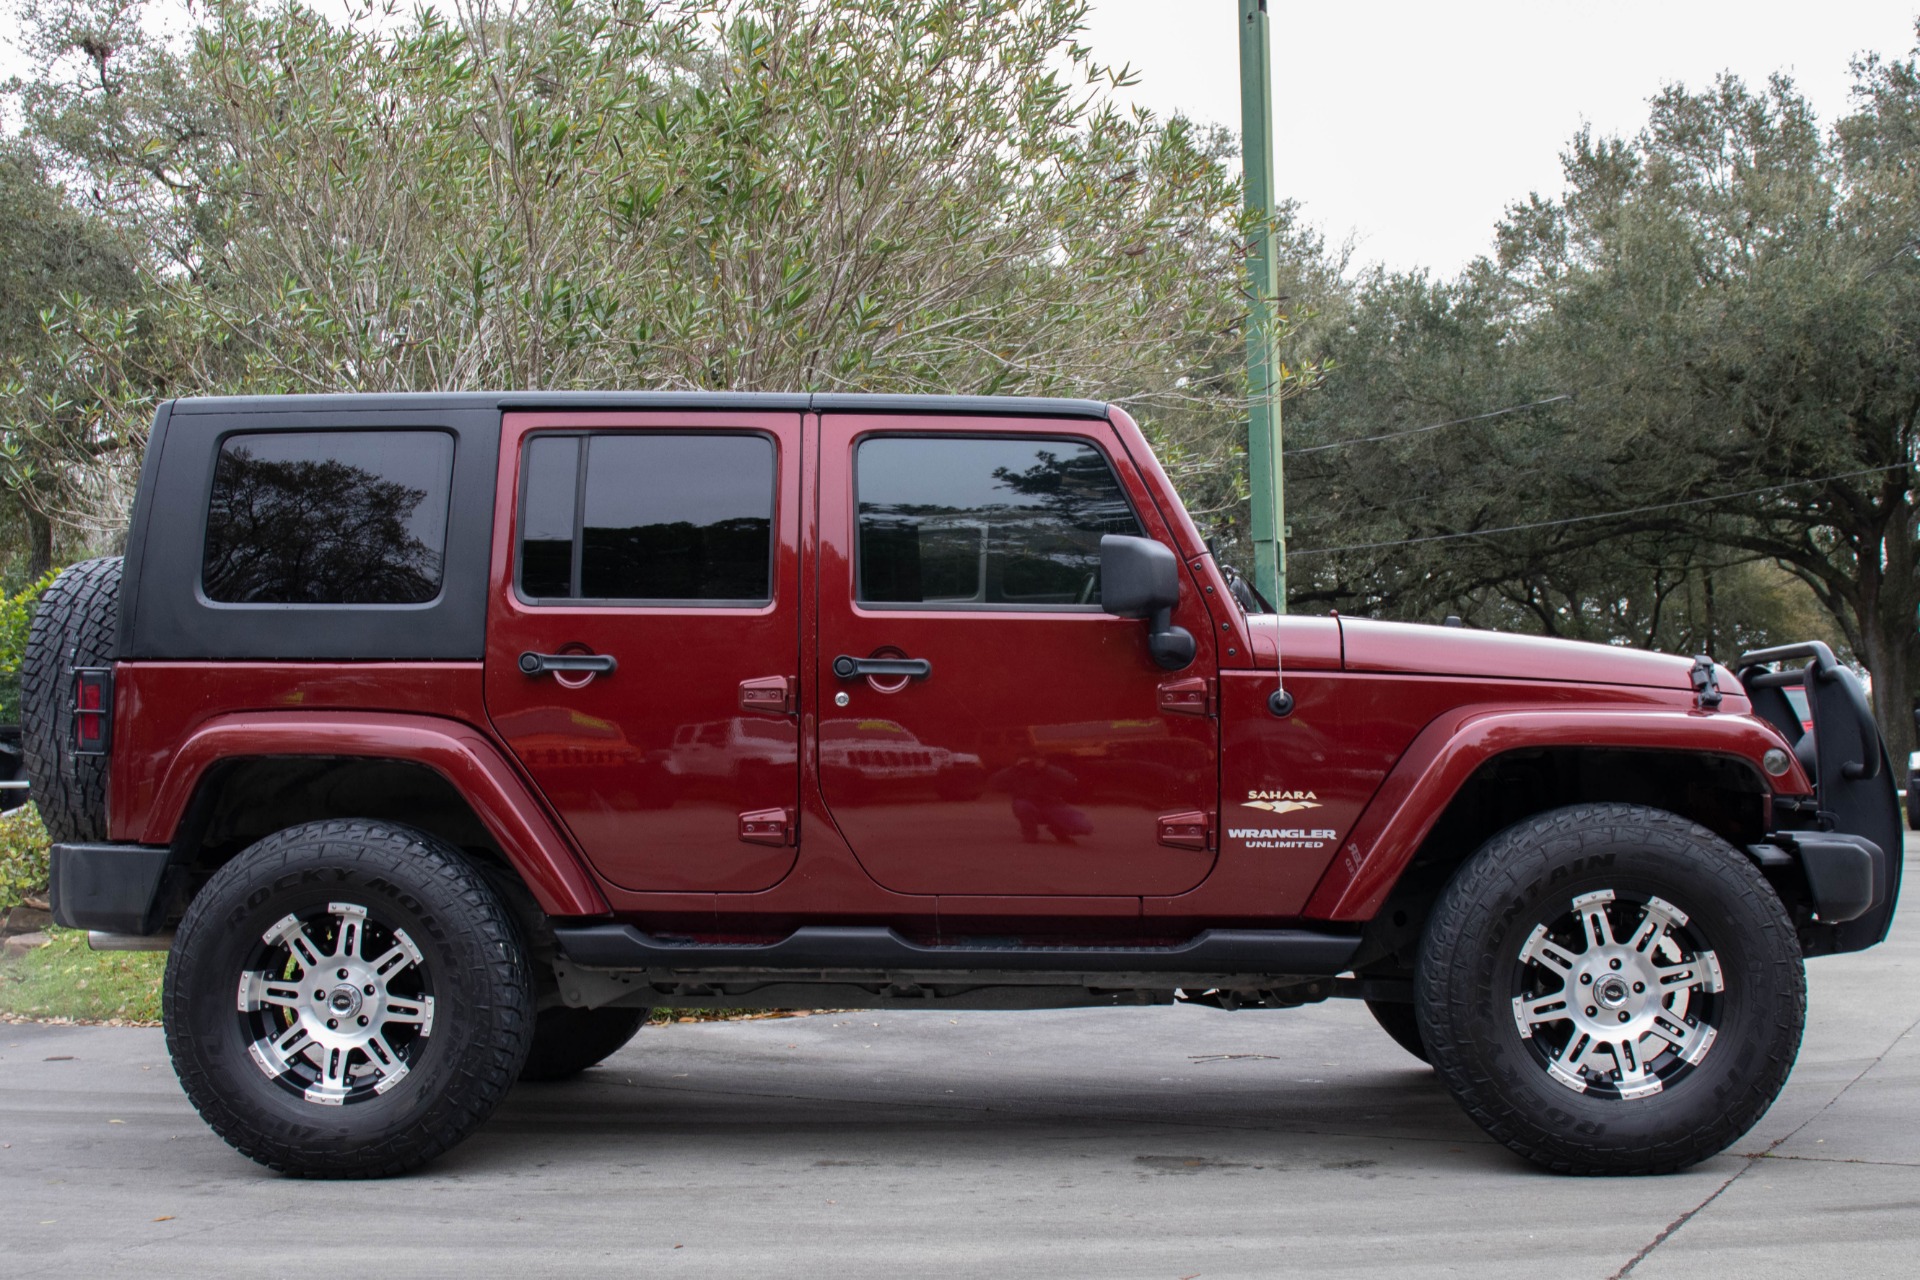 Used 2007 Jeep Wrangler Unlimited Sahara For Sale ($22,995) | Select Jeeps  Inc. Stock #116748